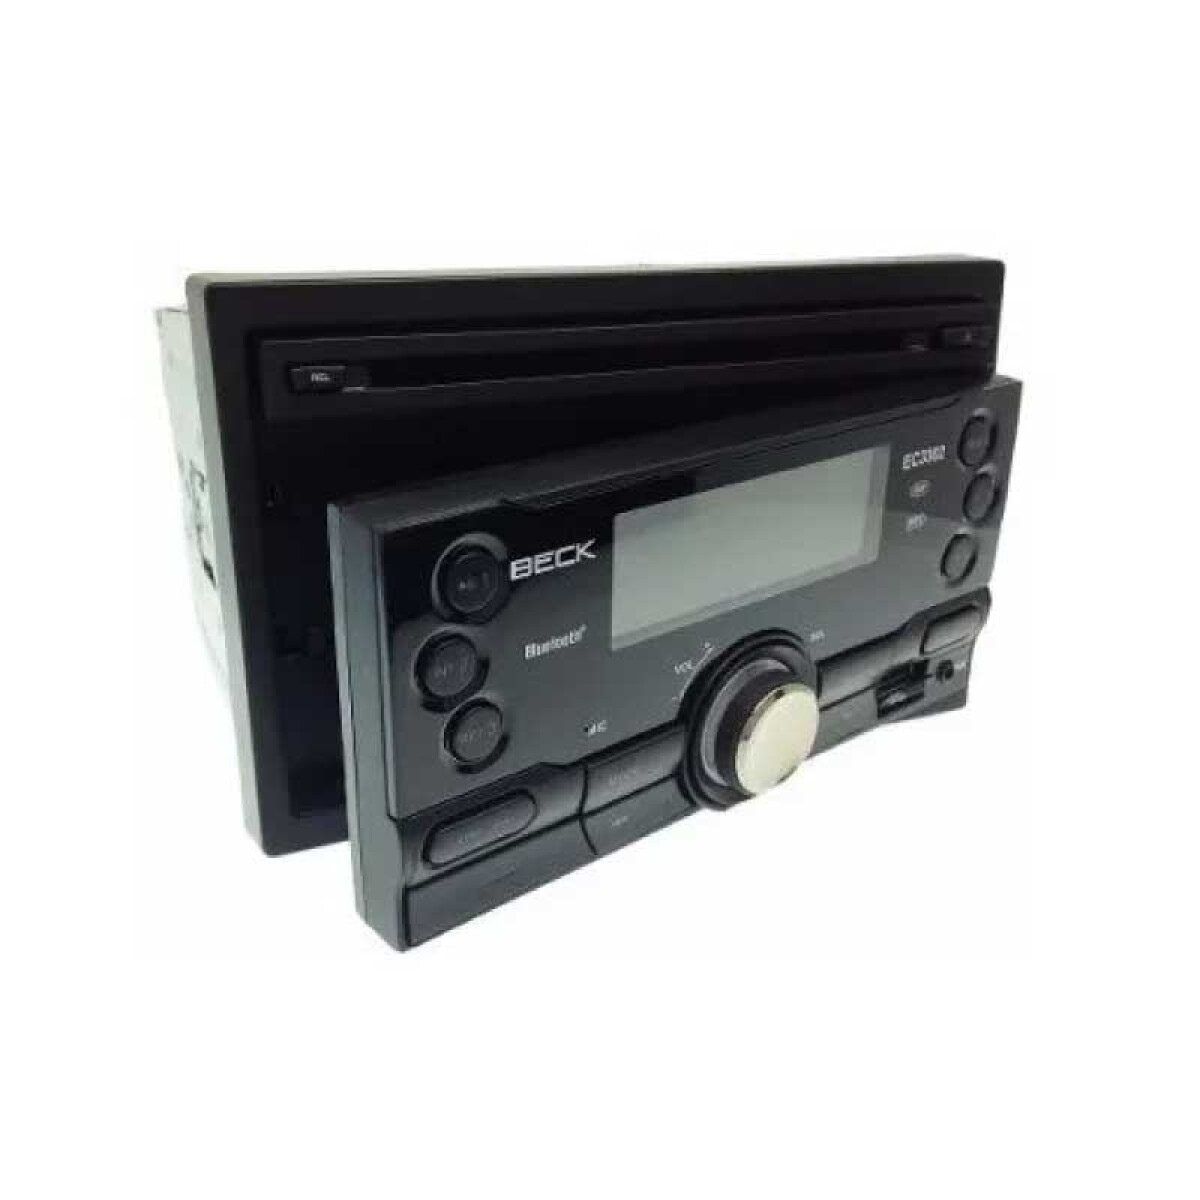 Radio Beck Ec3302 Bt/ Cd/mp3/wma Playback Usb, Aux-in Frontal 